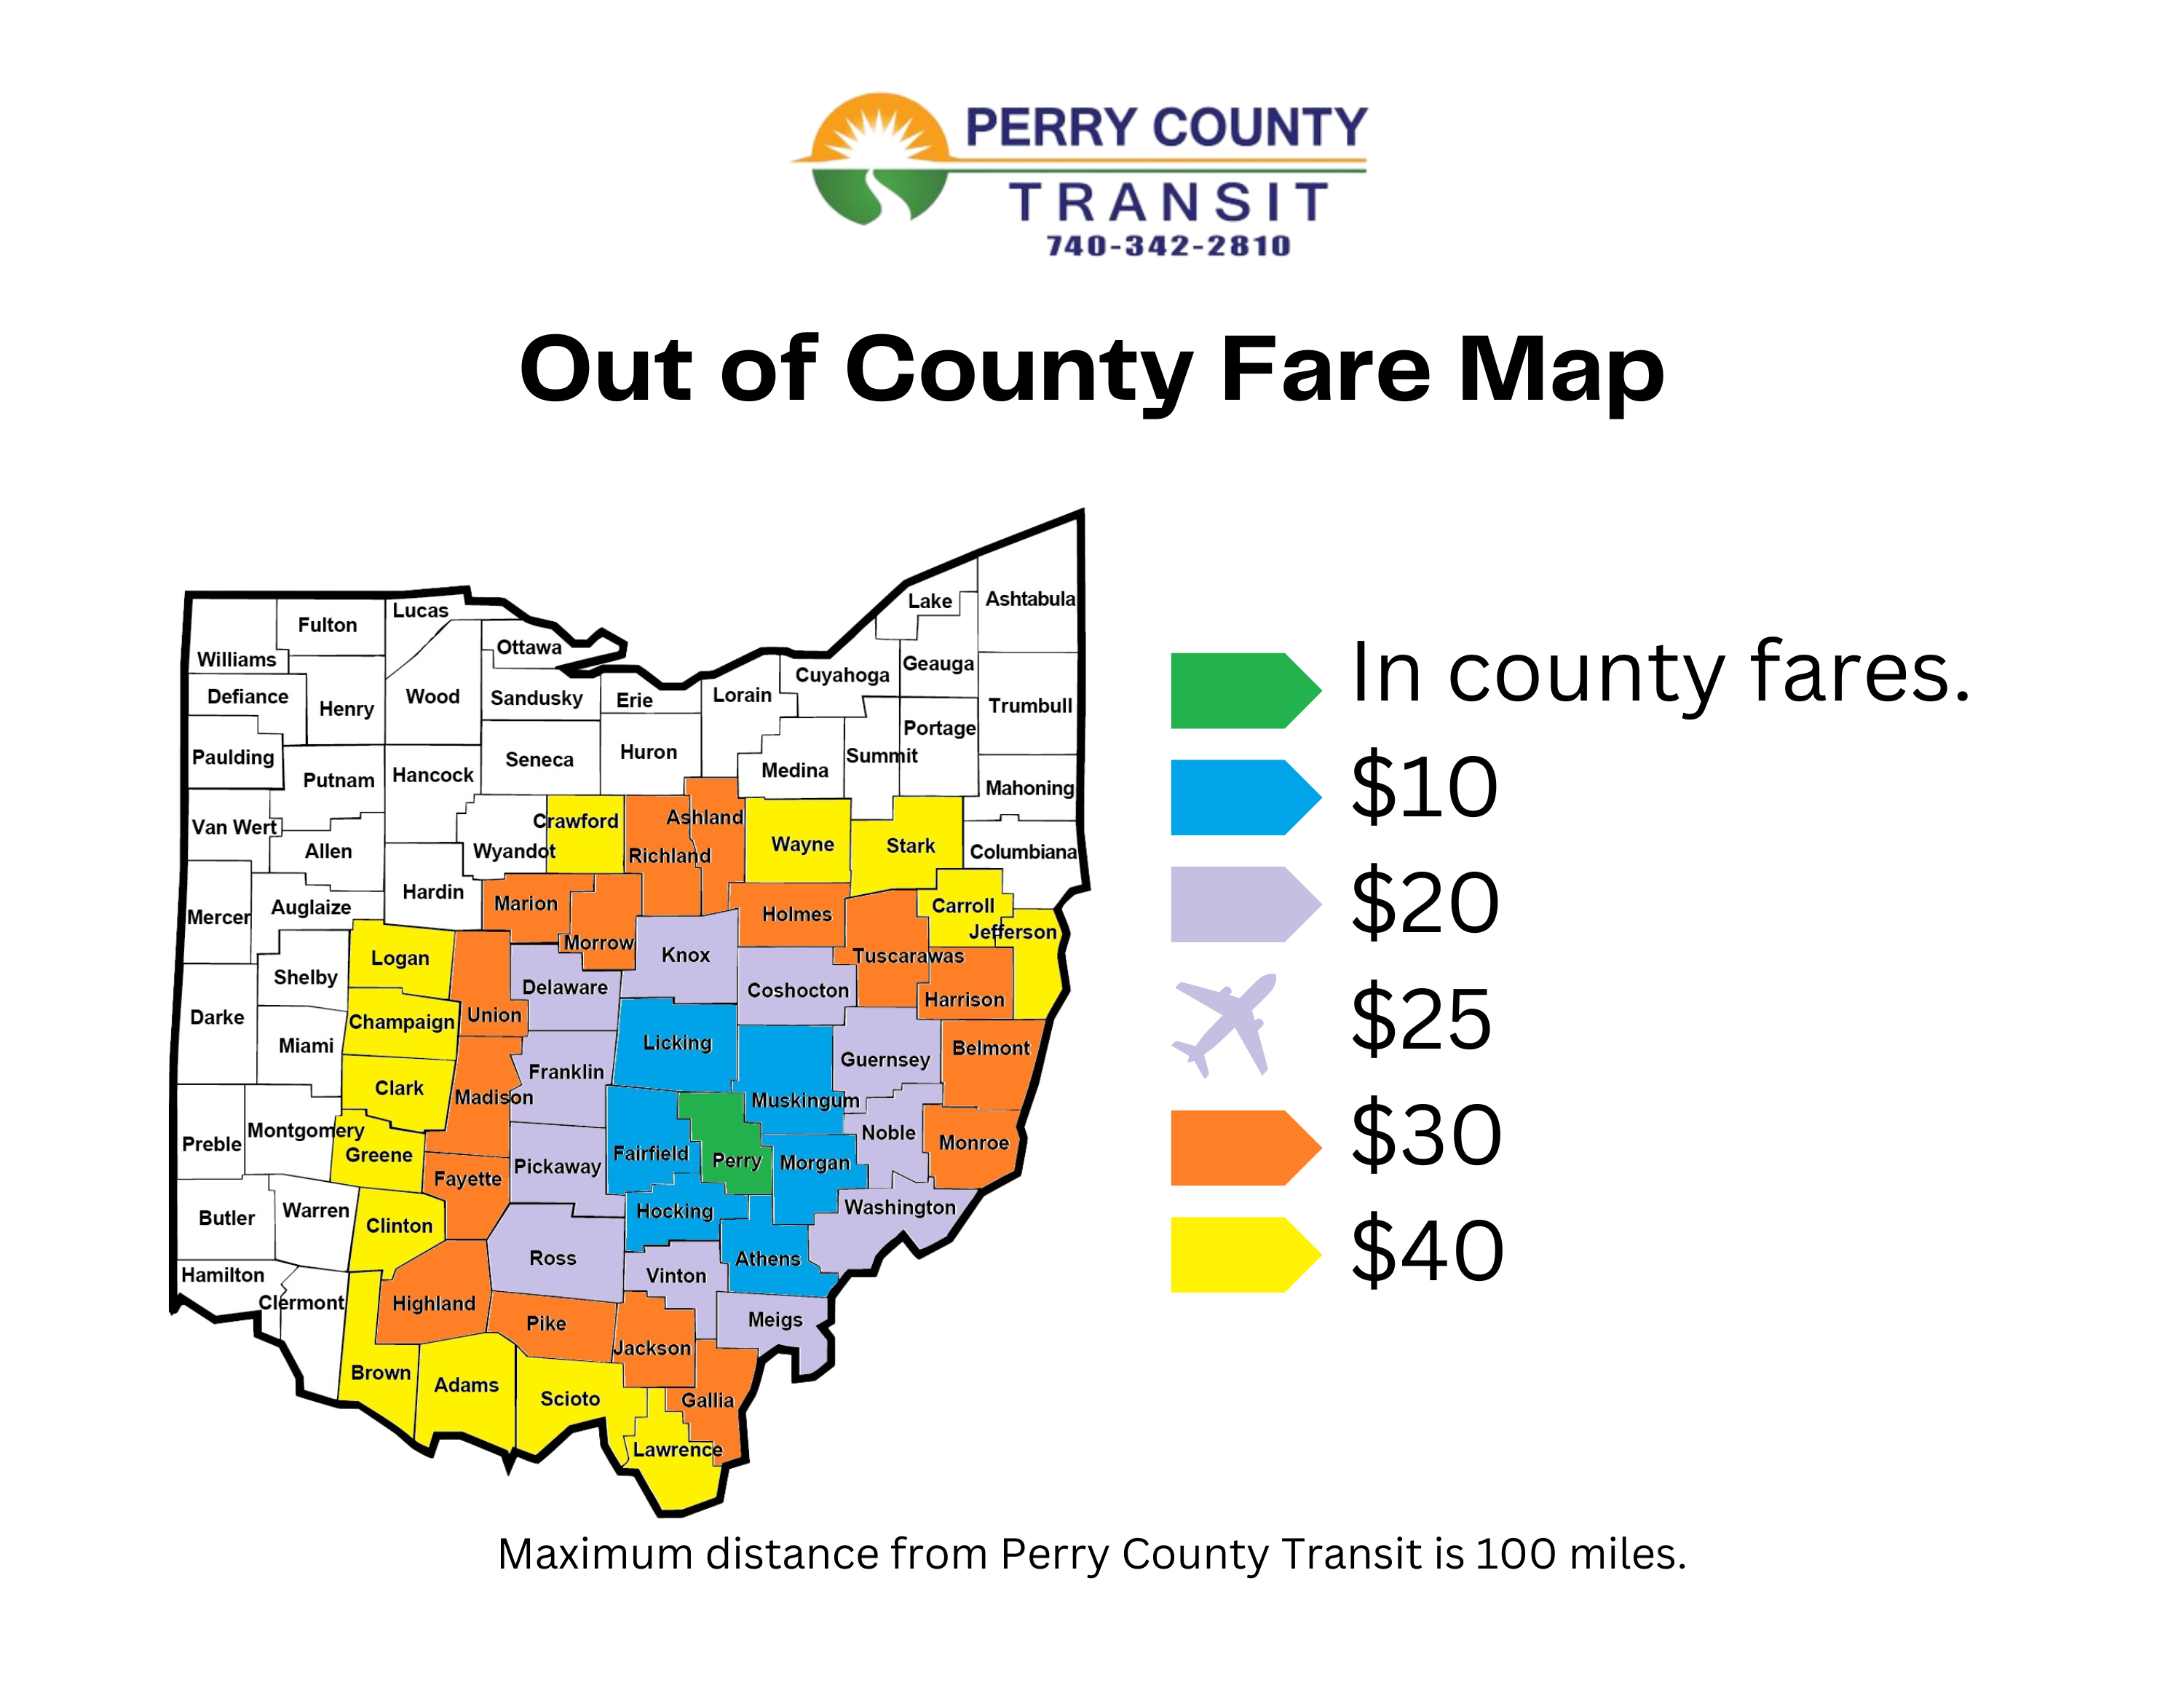 OUT OF COUNTY FARES ad